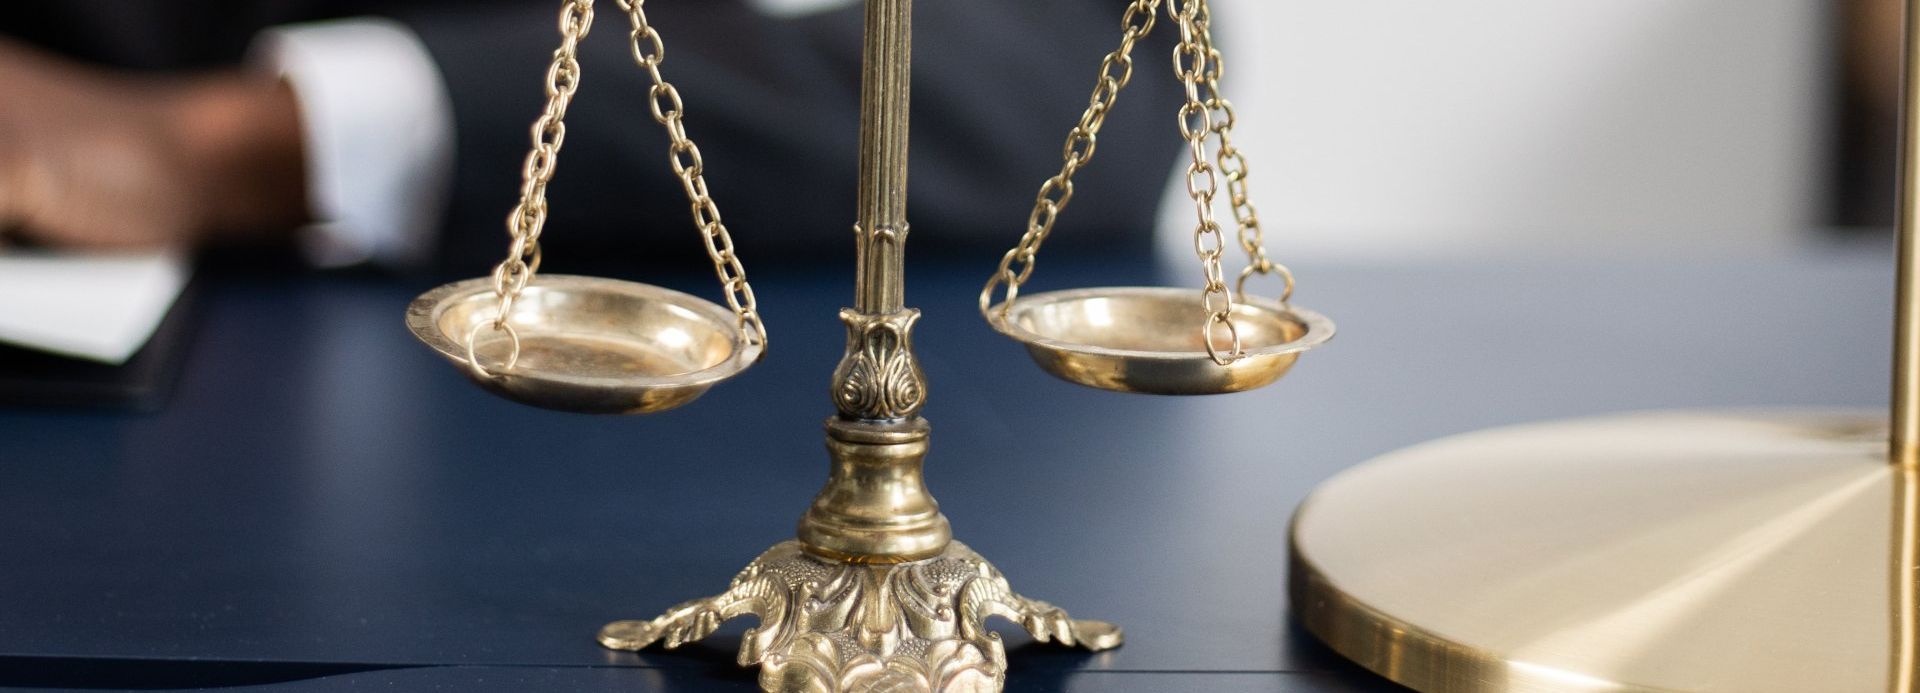 a close up of a scale of justice on a table .